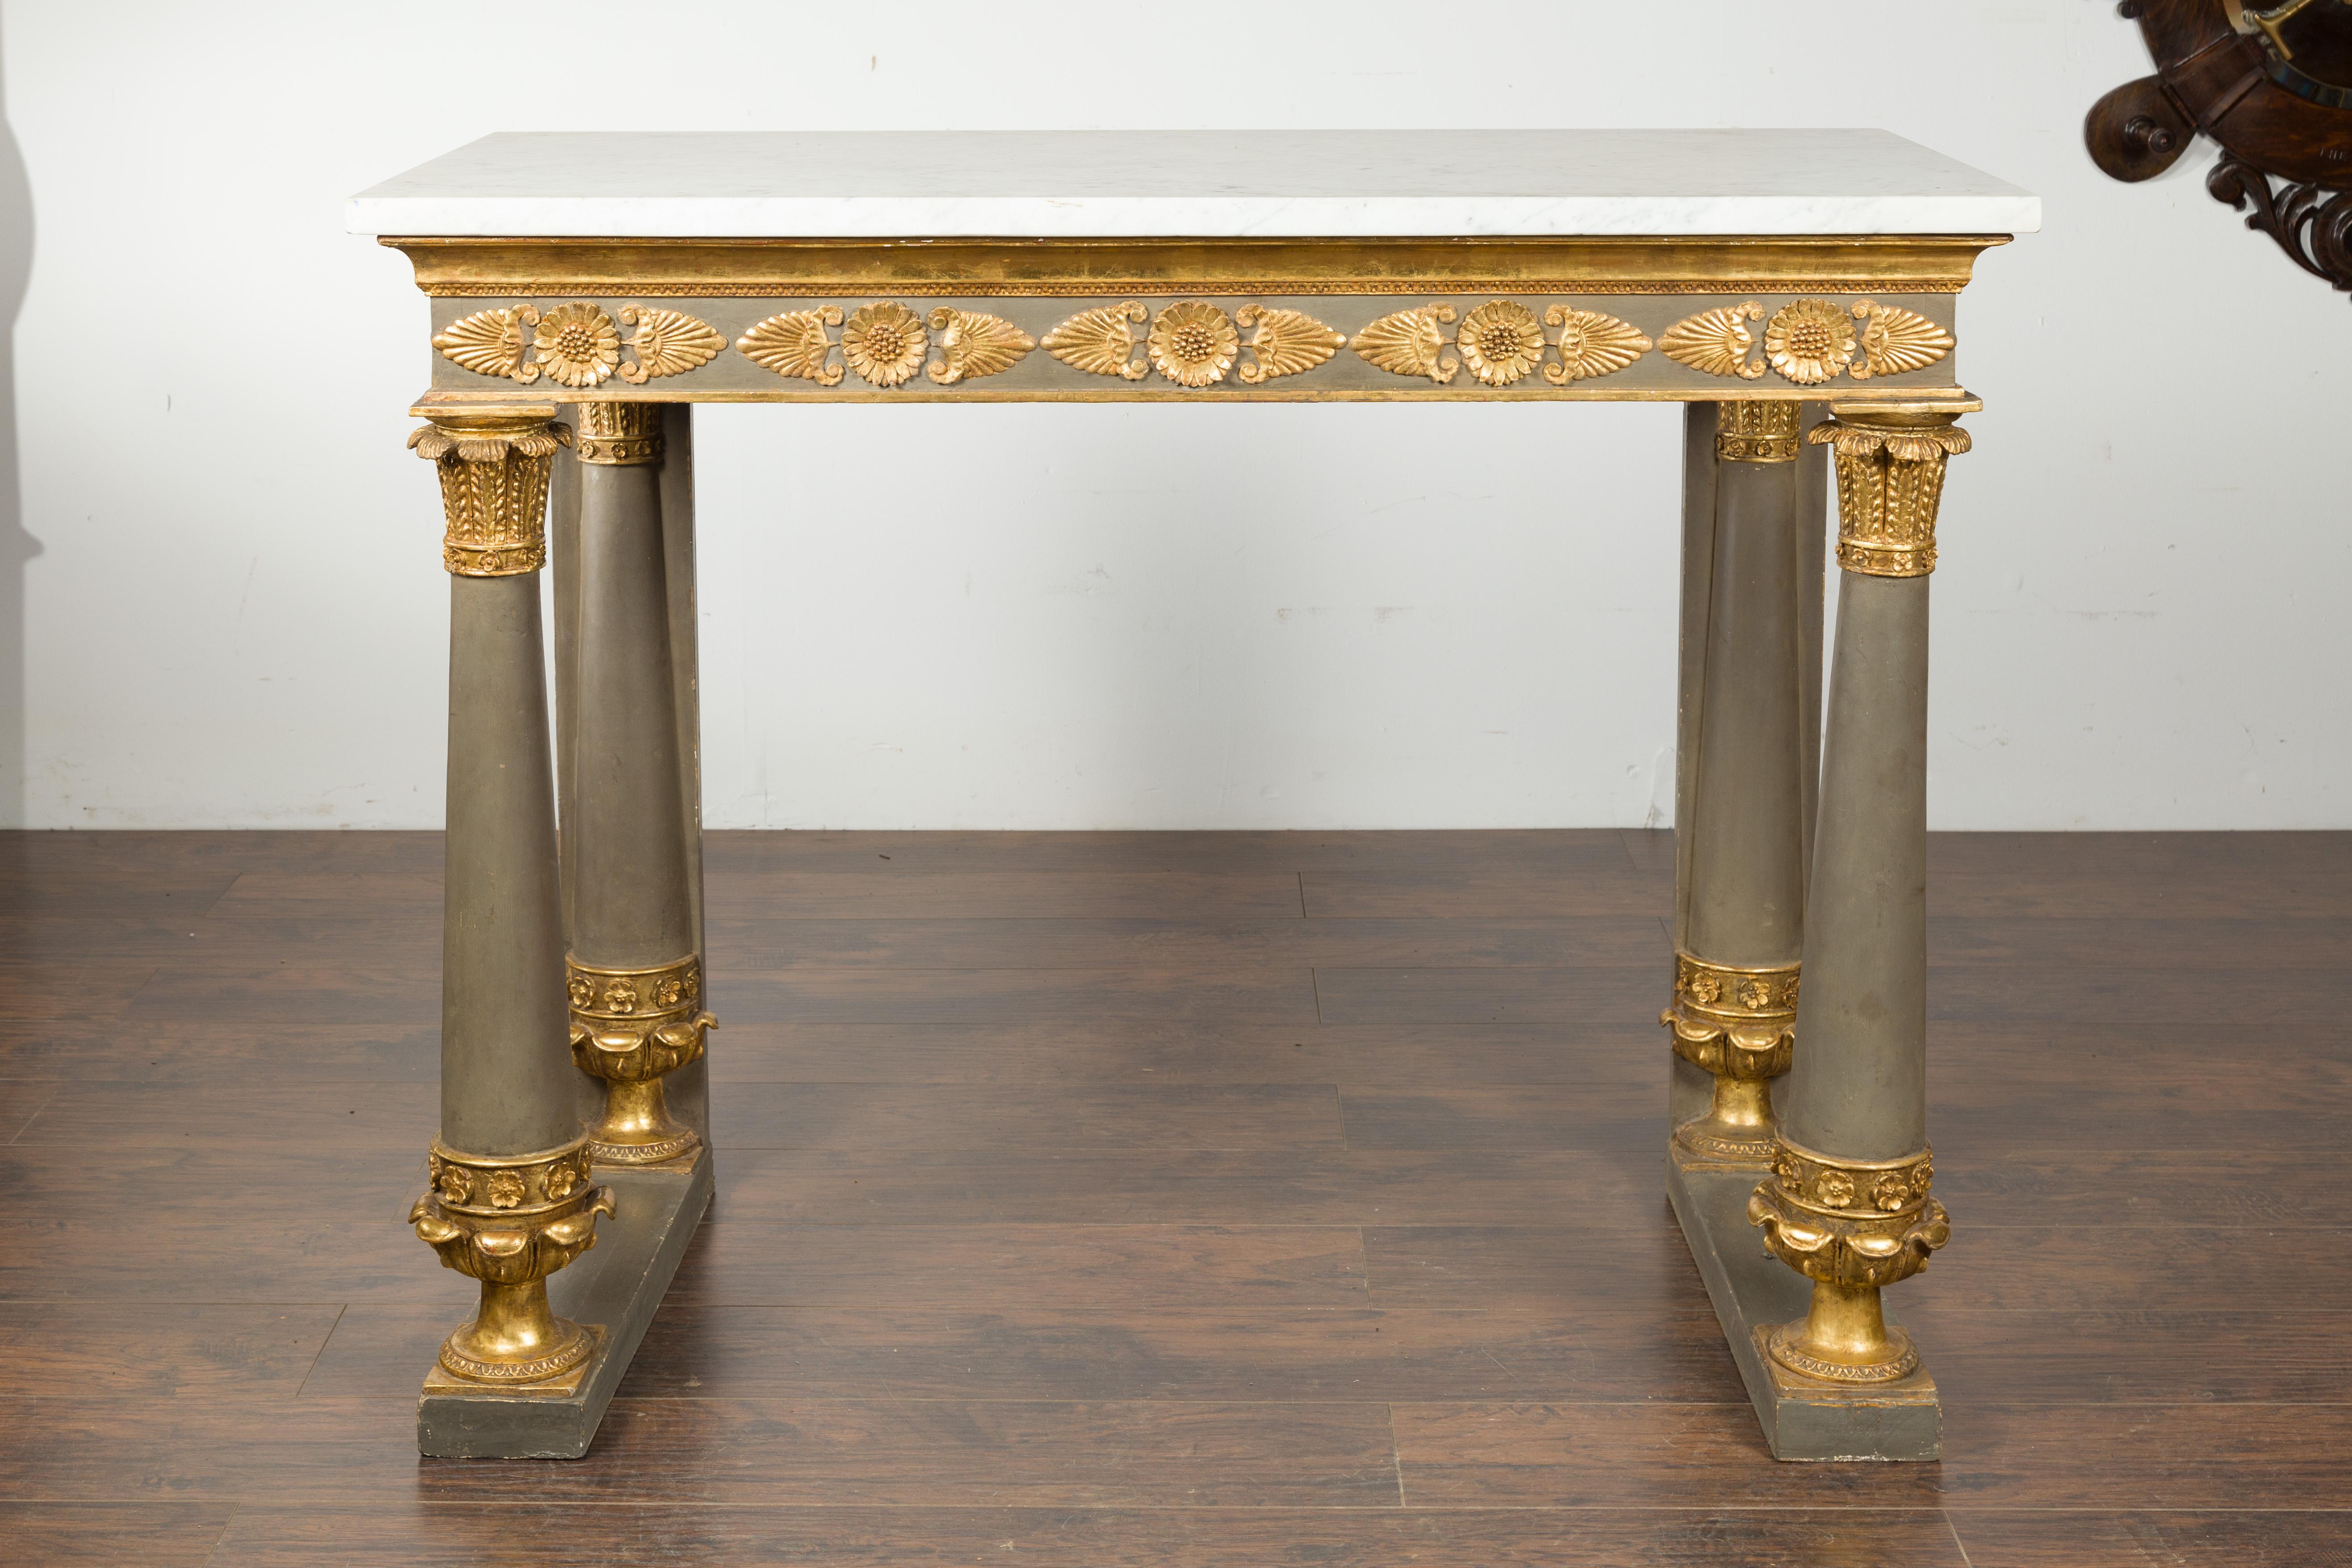 A French Empire console table from the early 19th century, with white marble top and giltwood accents. Created in France during the second quarter of the 19th century, this Empire console table features a rectangular white marble top sitting above a